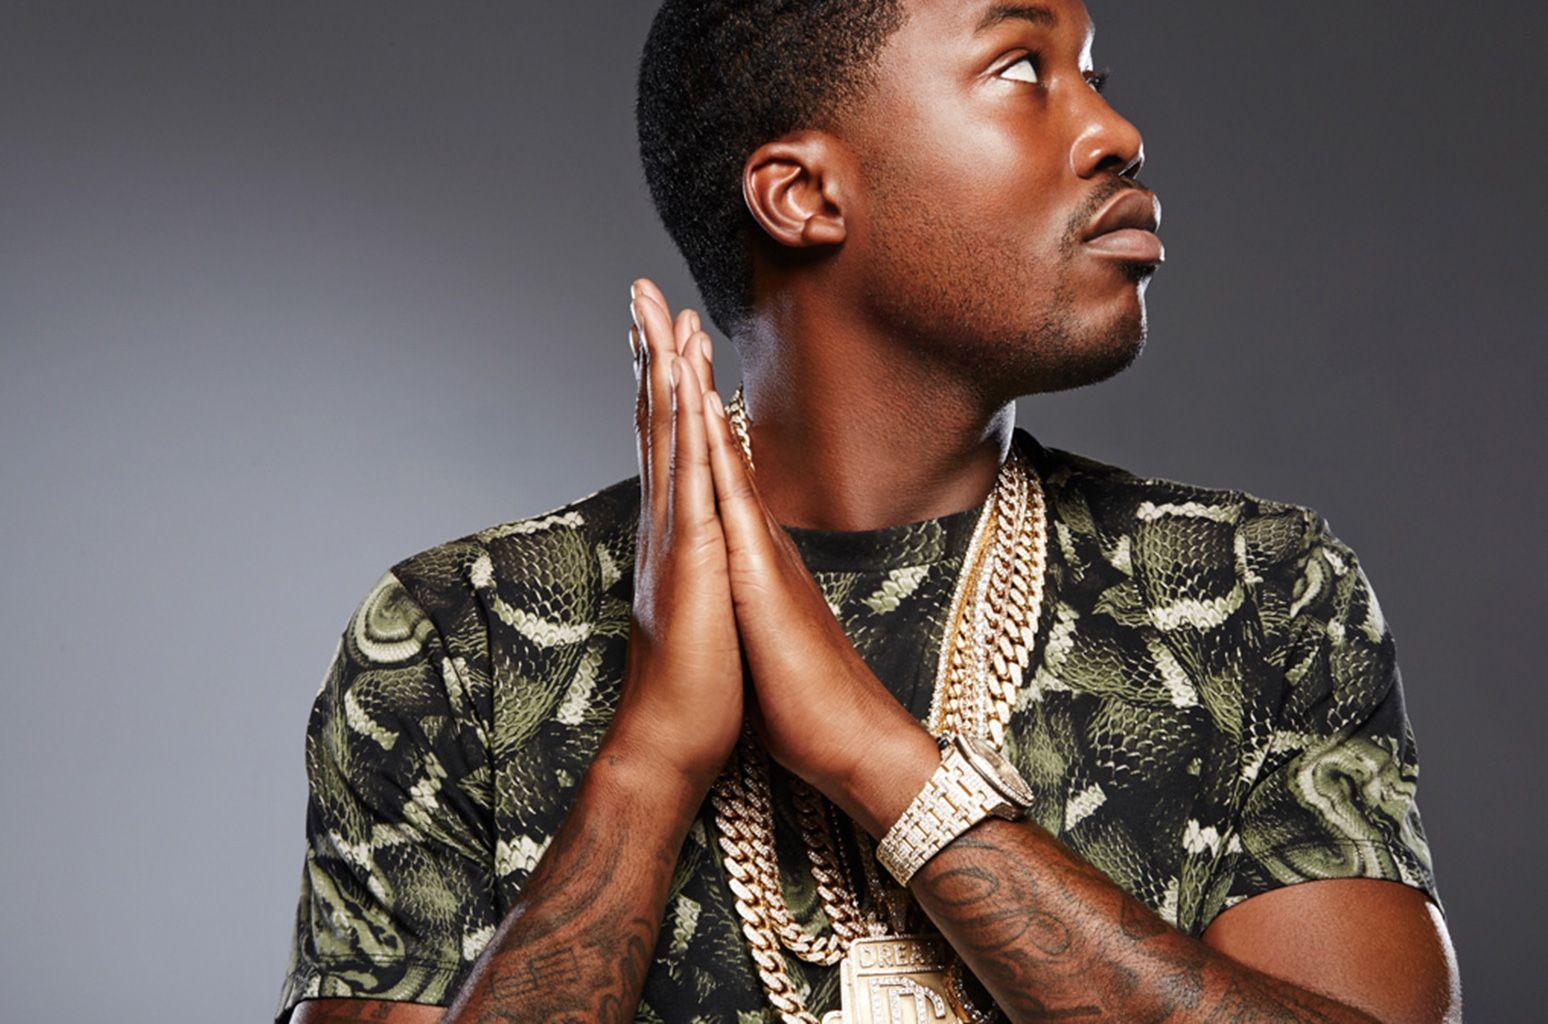 Meek Mill Charged With Assault After Altercation at St. Louis